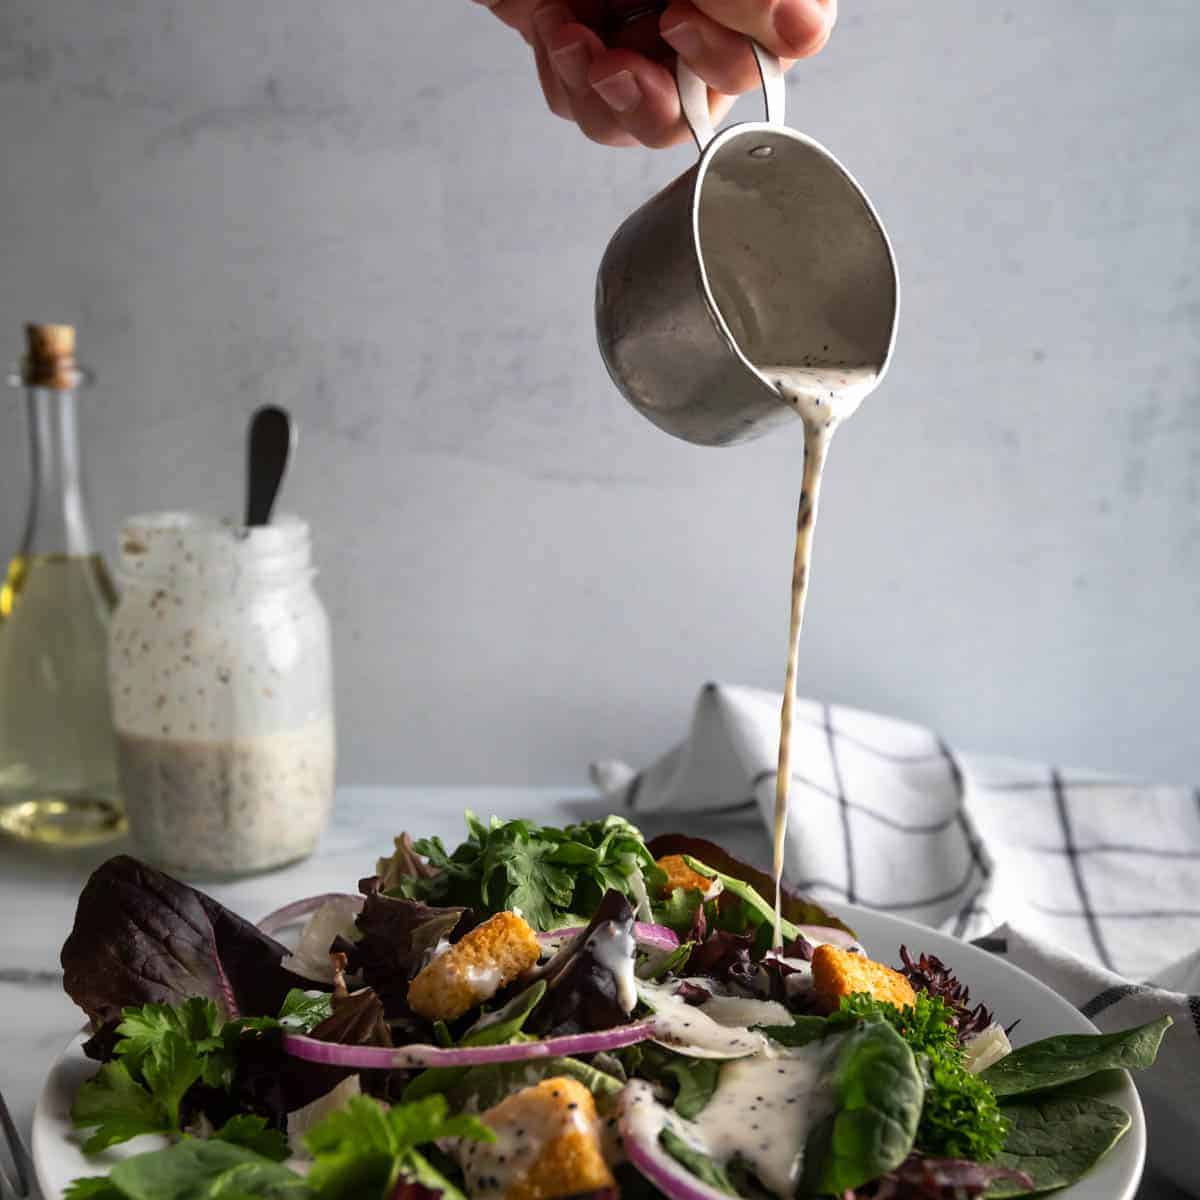 A small tin of creamy poppyseed dressing being poured over a green salad